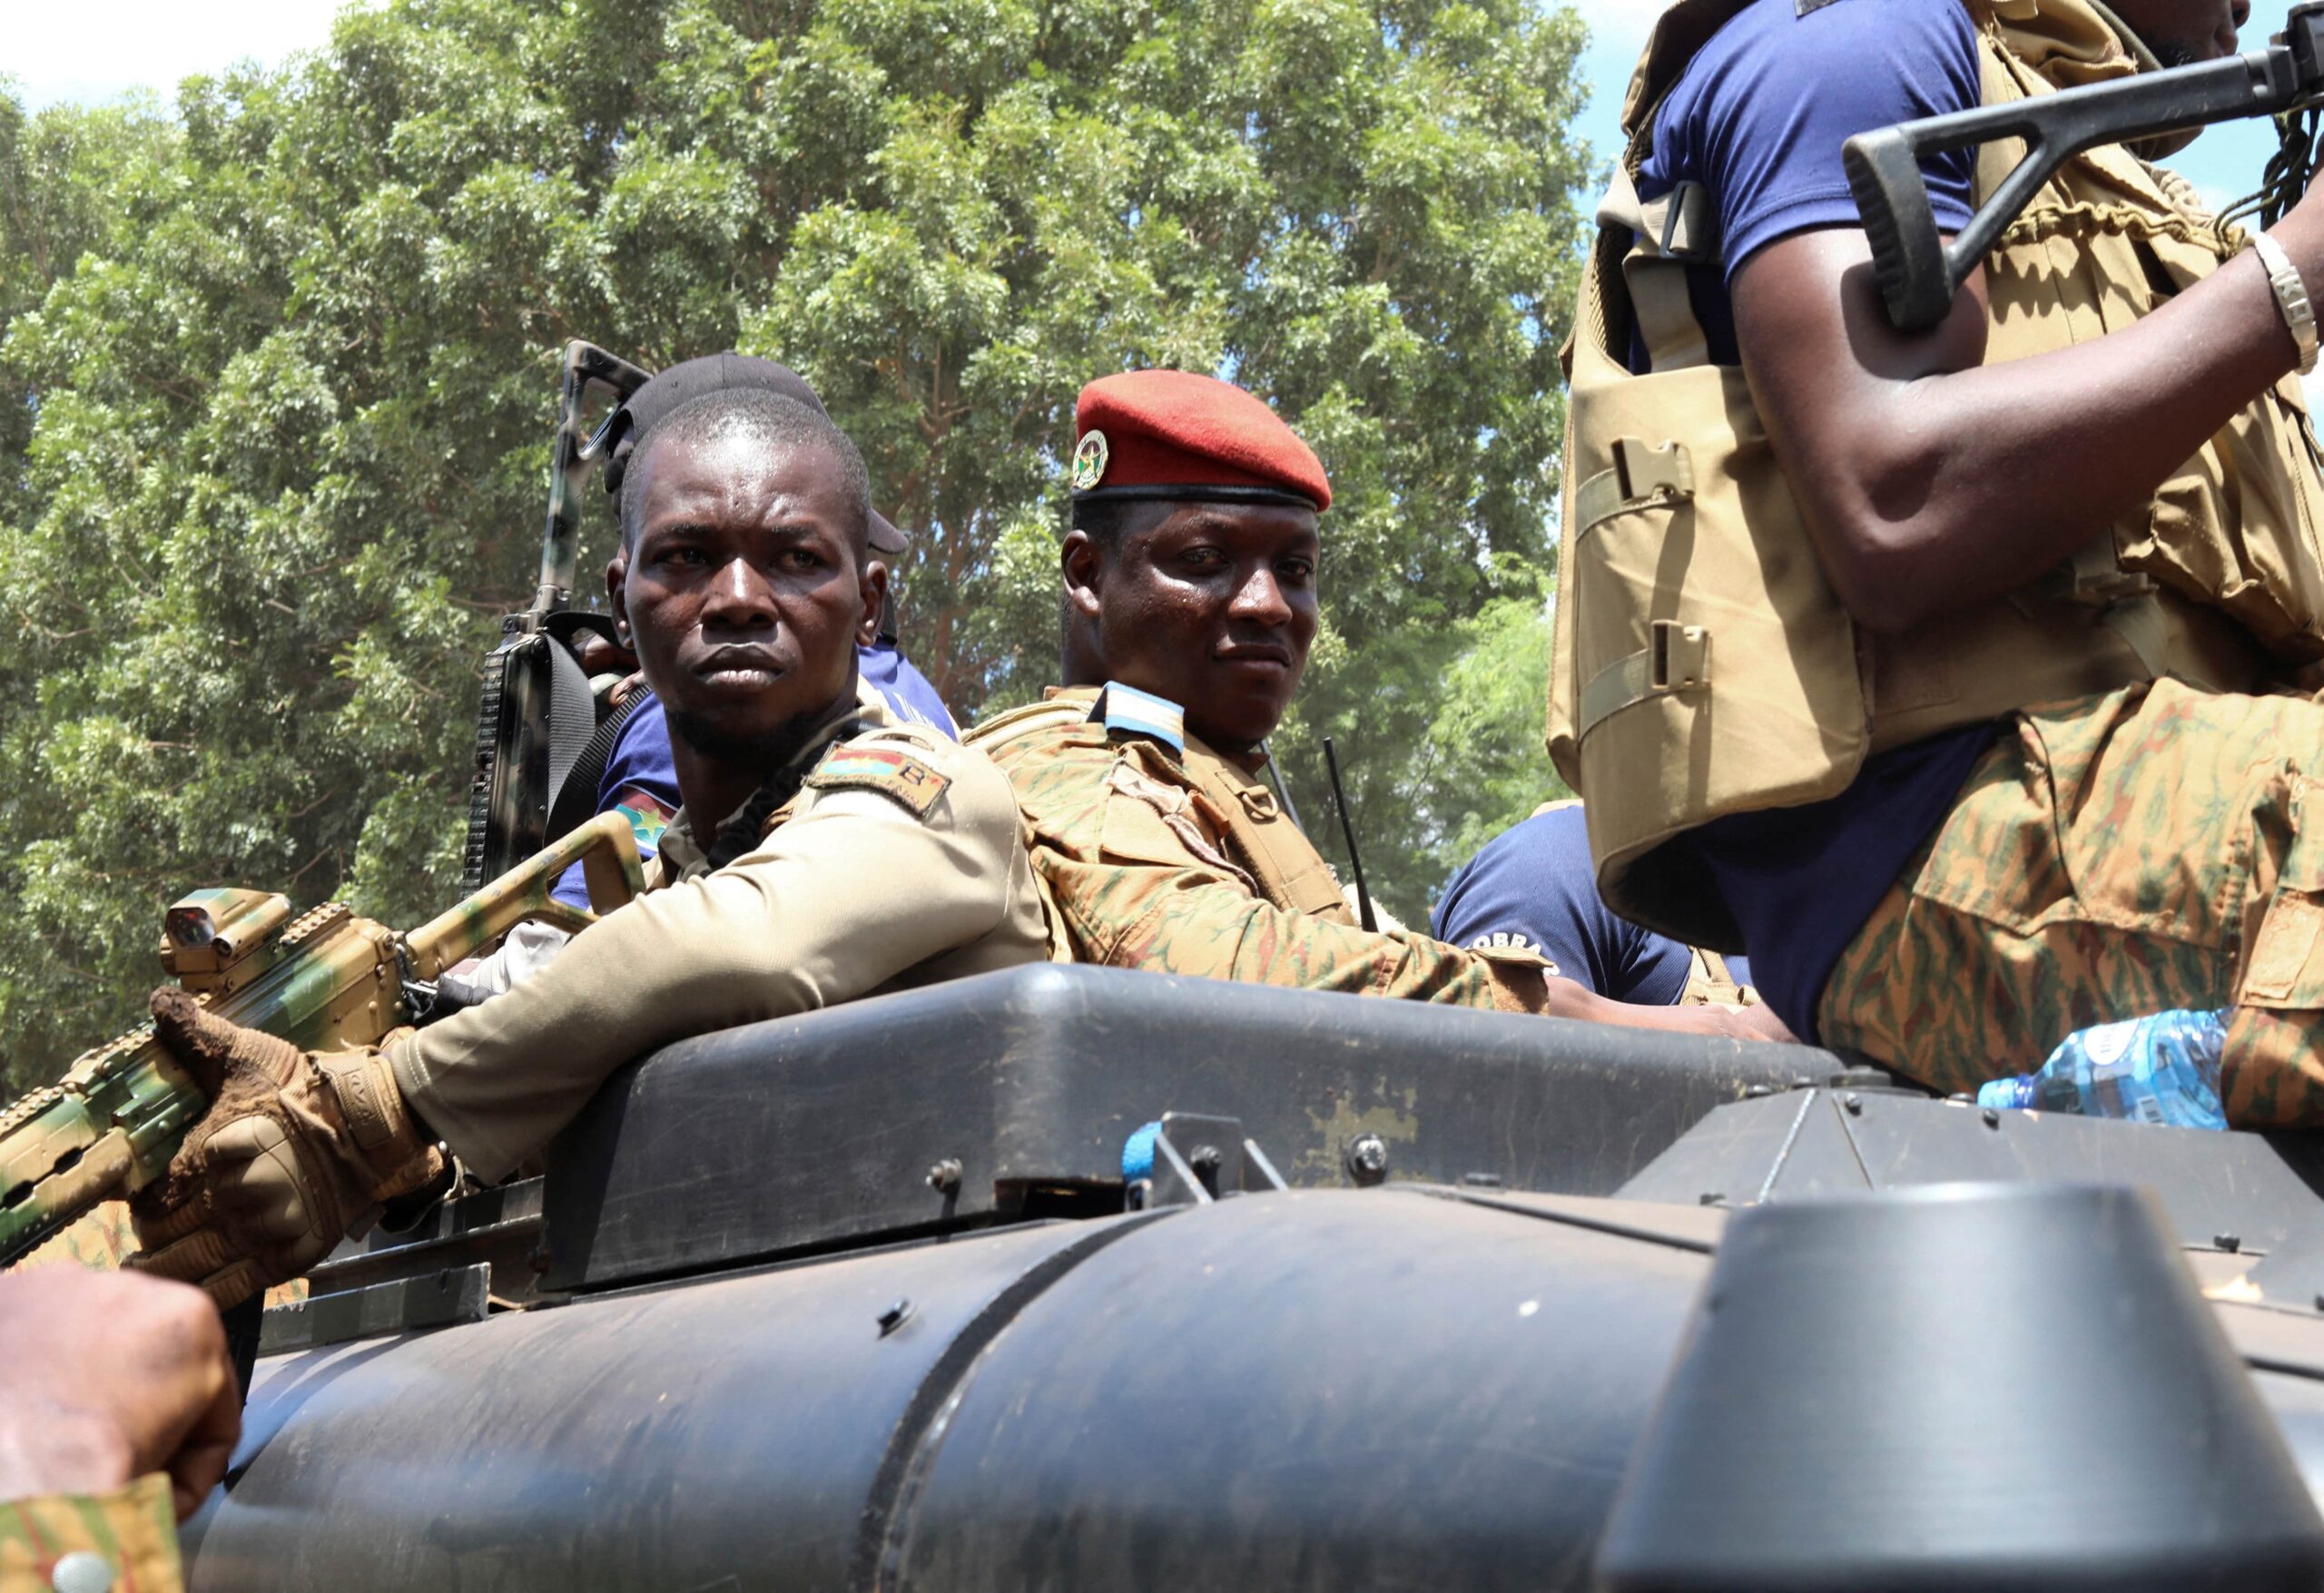 Burkina Faso: Military coup is a blow to stability and threatens human rights